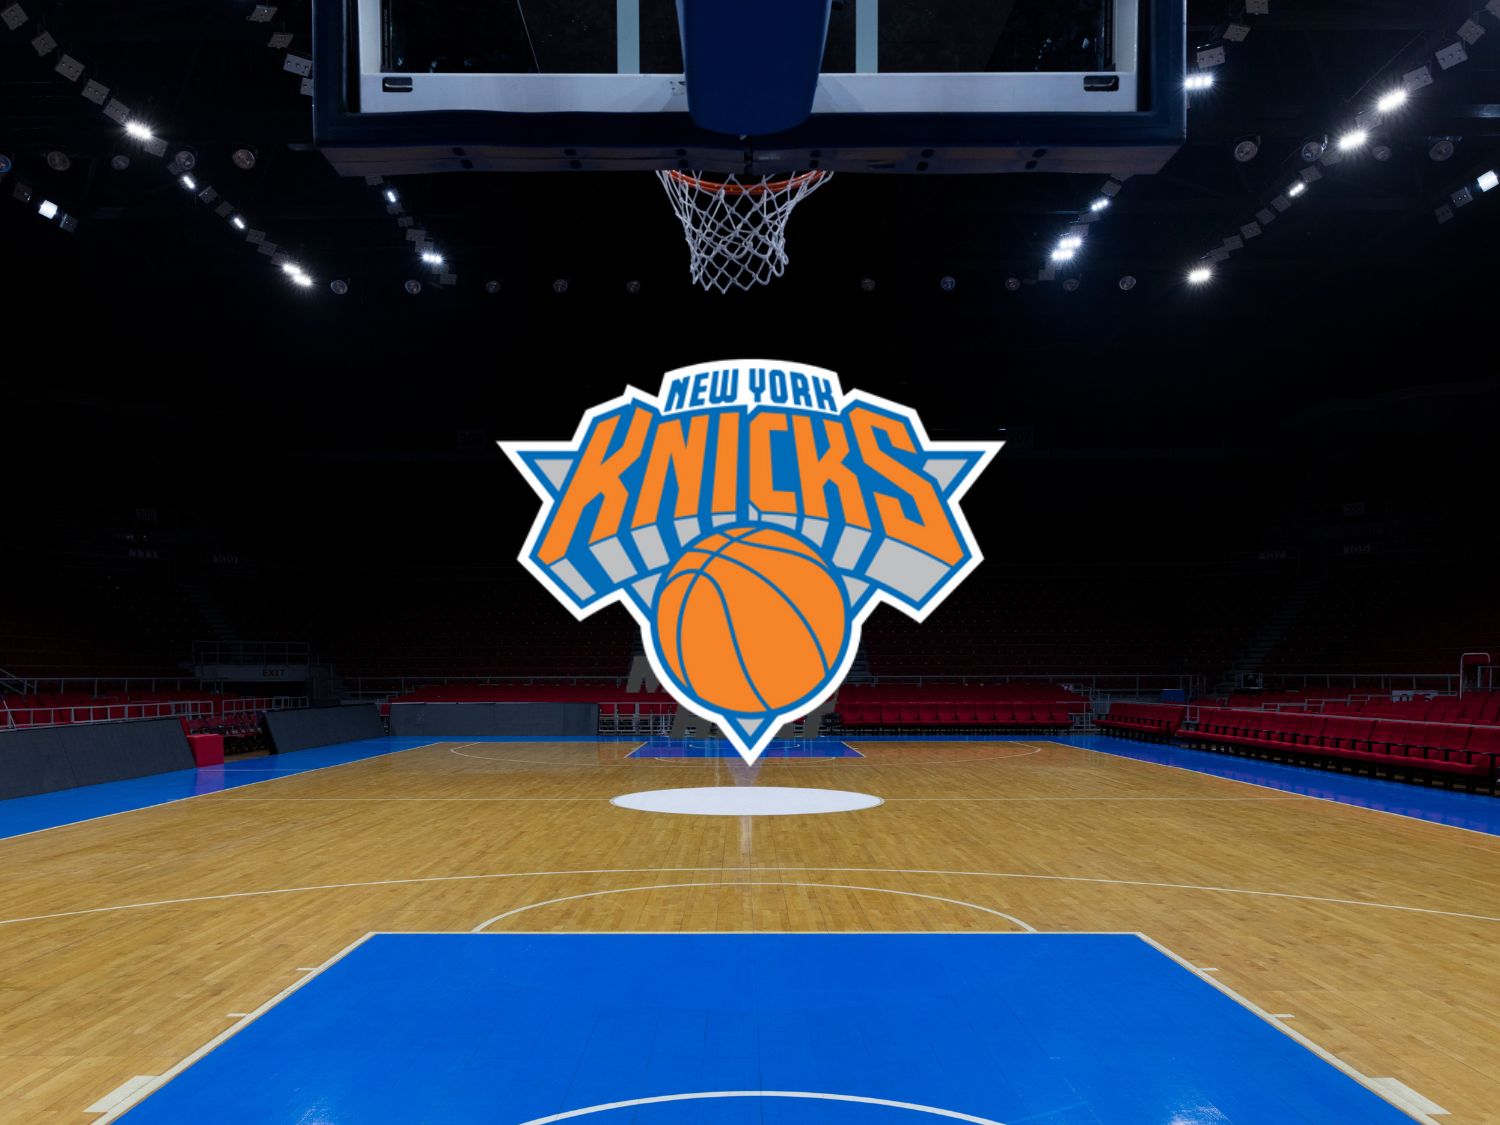 New York Knicks Tickets and Seats